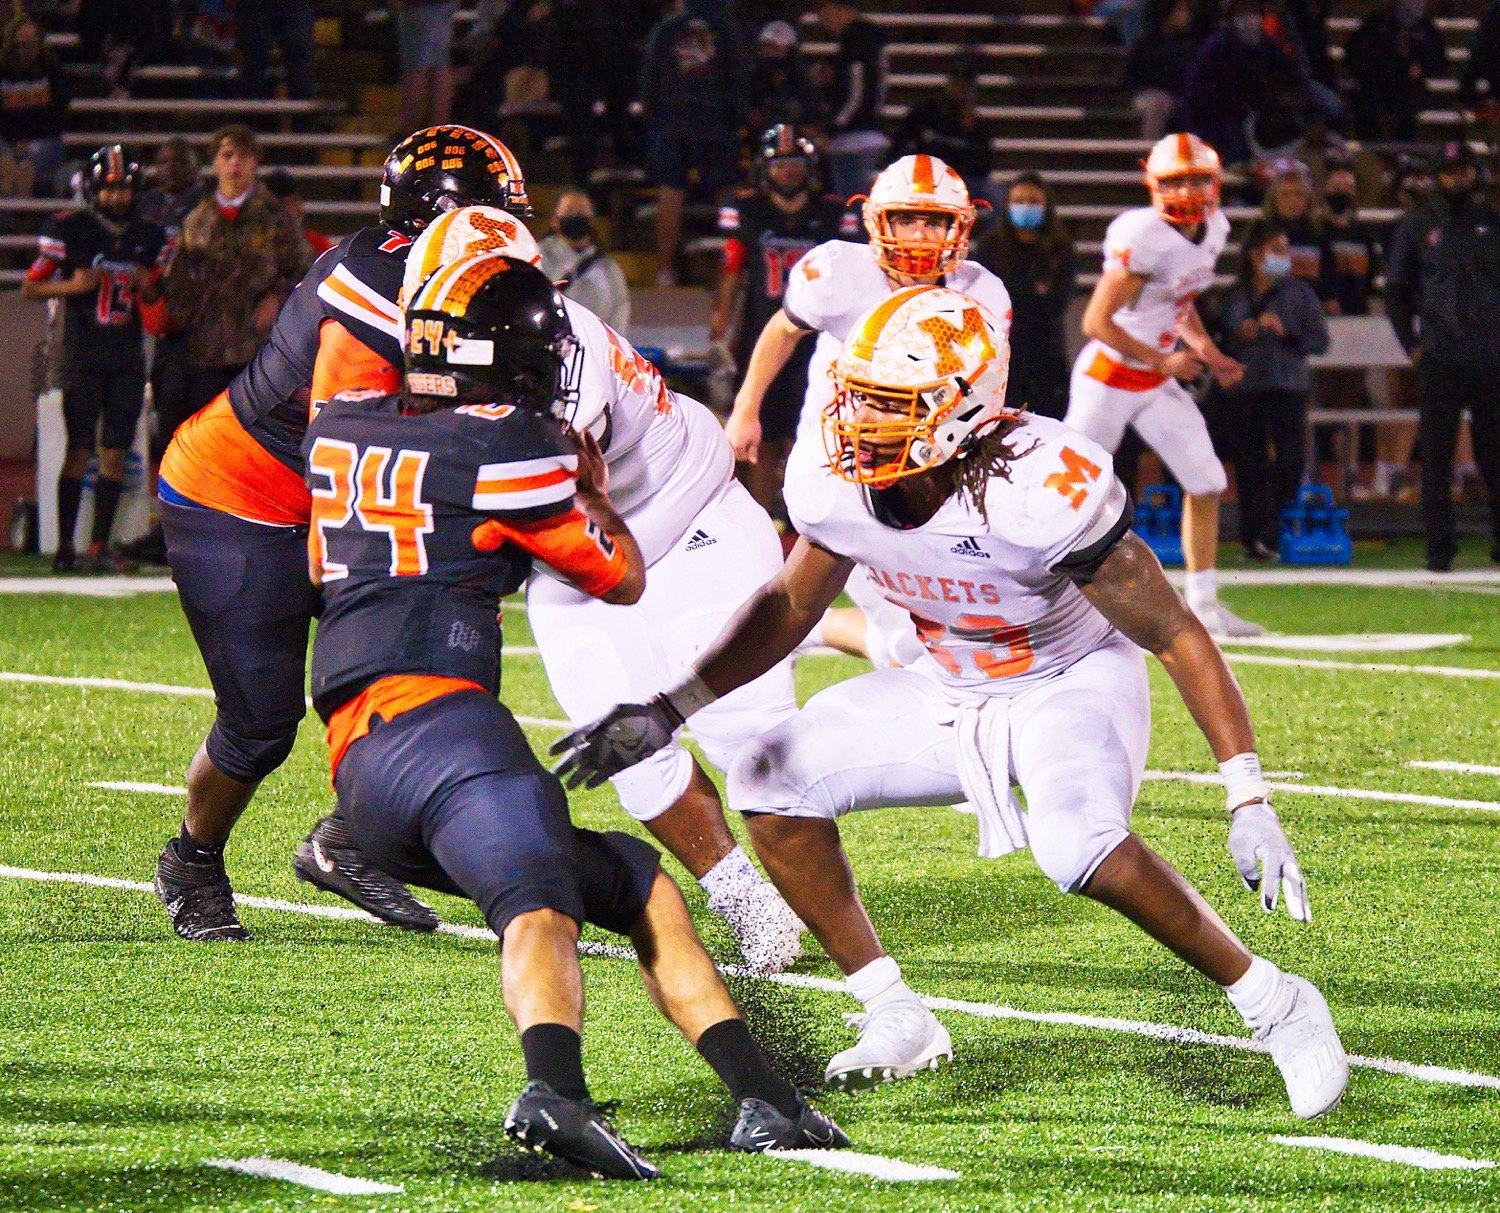 Trevion Sneed stops a Commerce ballcarrier in his tracks. Doing so with regularity and ferocity made him one of the best linebackers in the state of Texas.  [see more shots of Sneed in action]